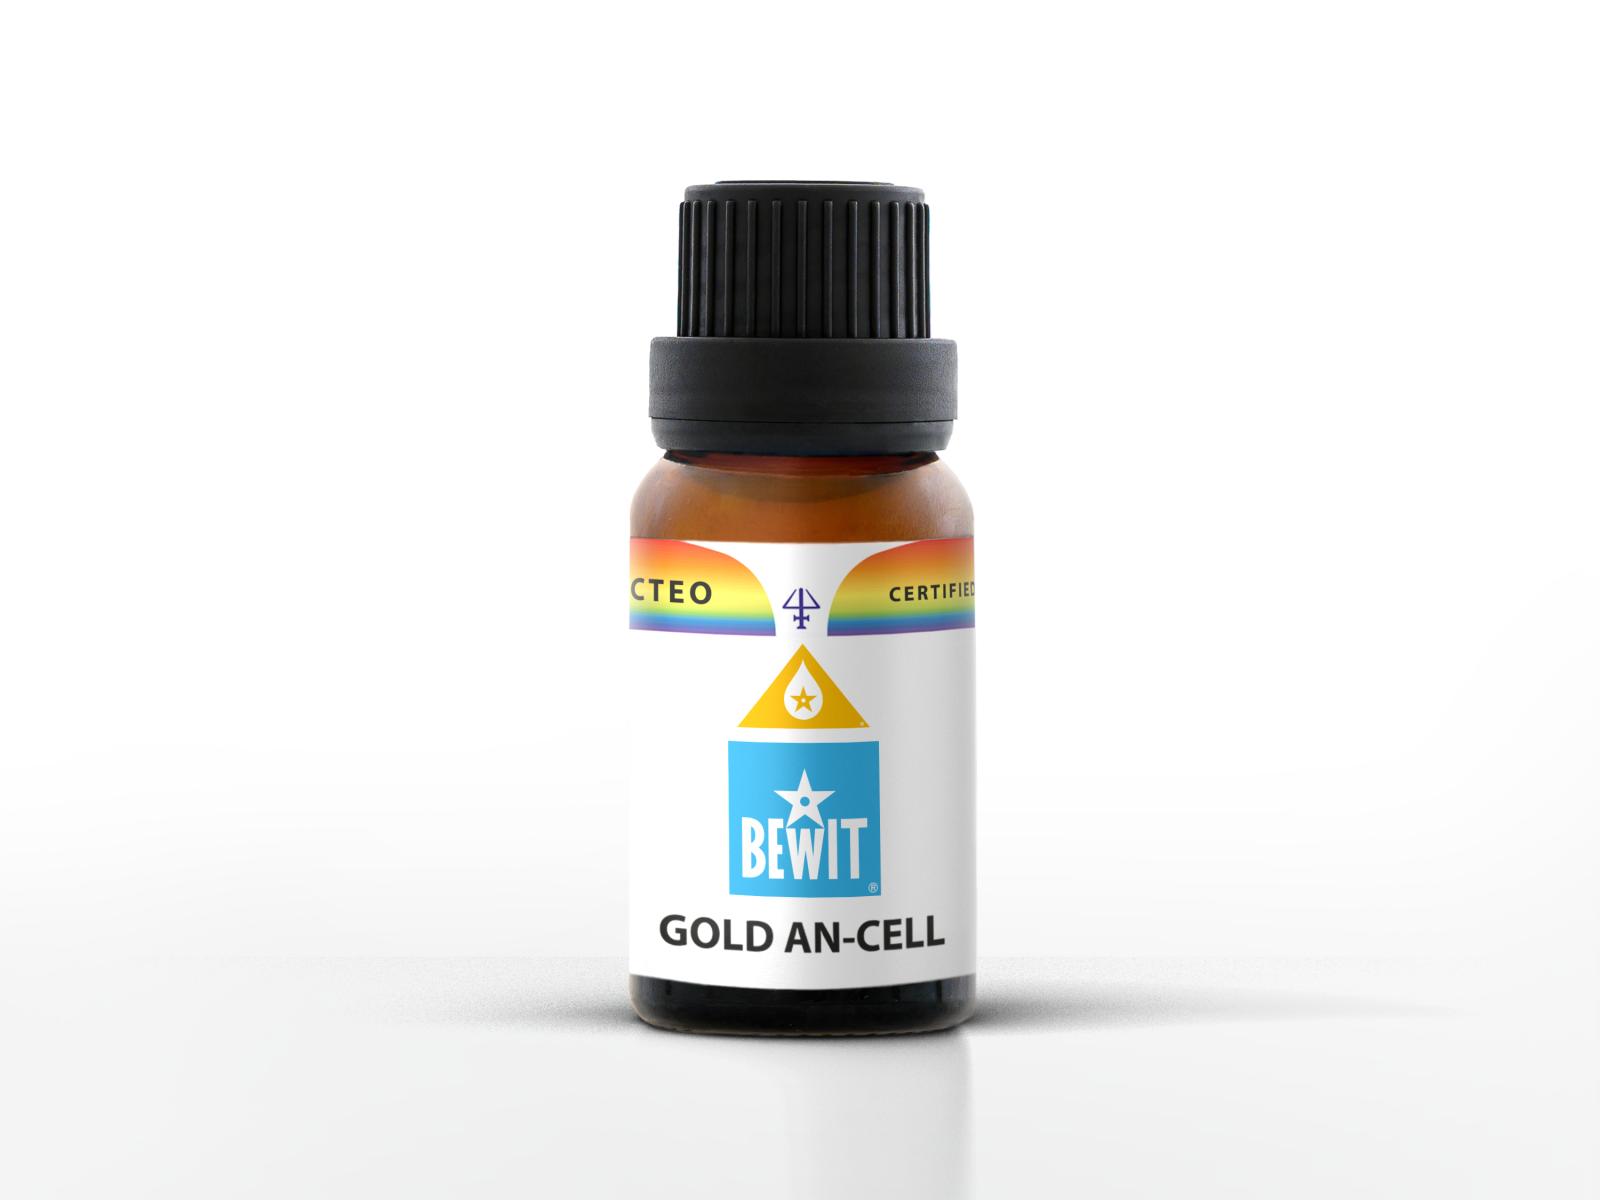 BEWIT GOLD AN-CELL